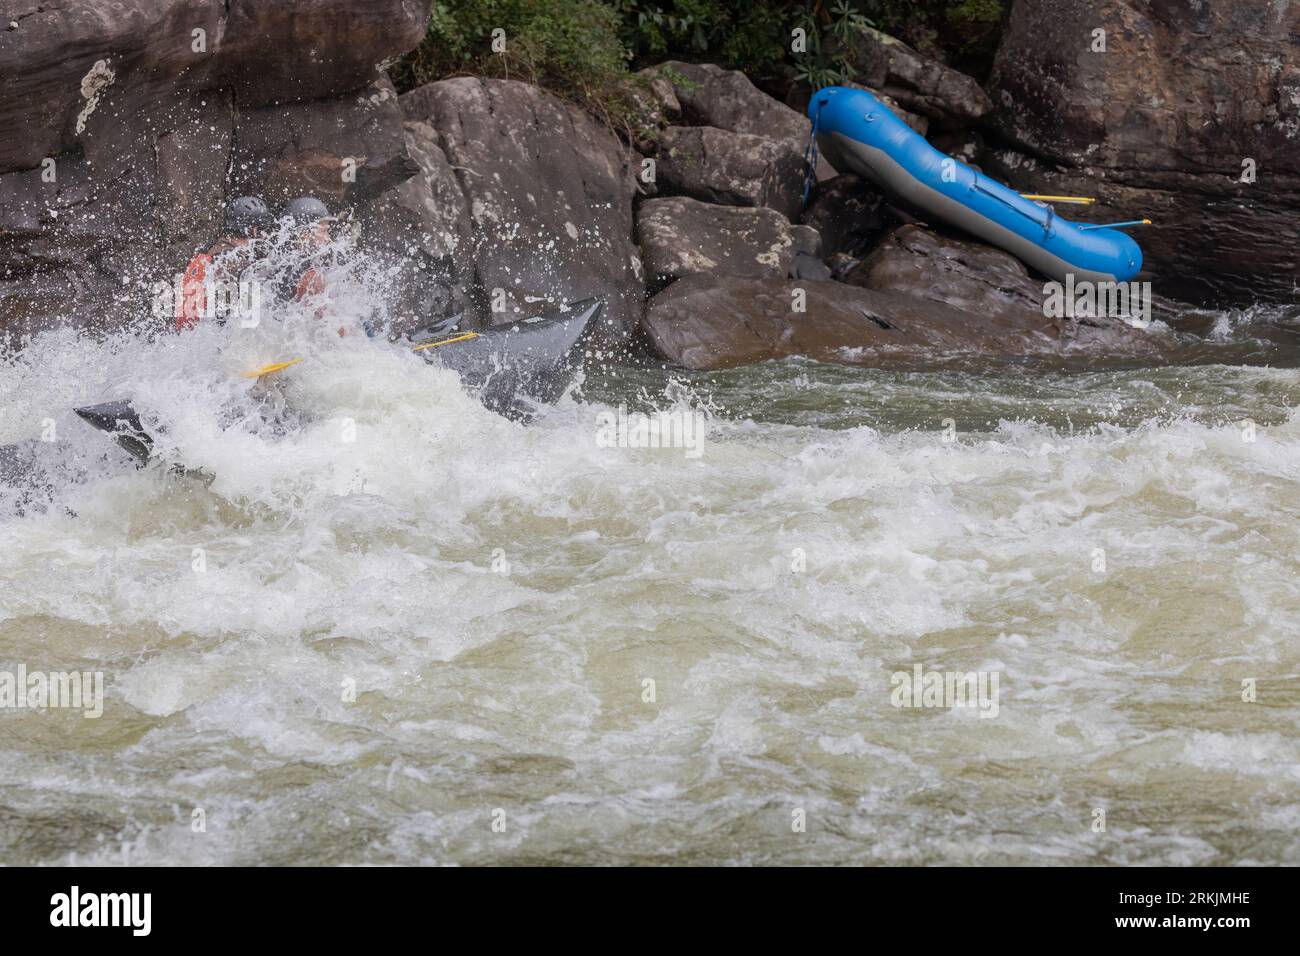 An adventurous kayaker navigating the challenging rapids of the Gauley River in West Virginia Stock Photo